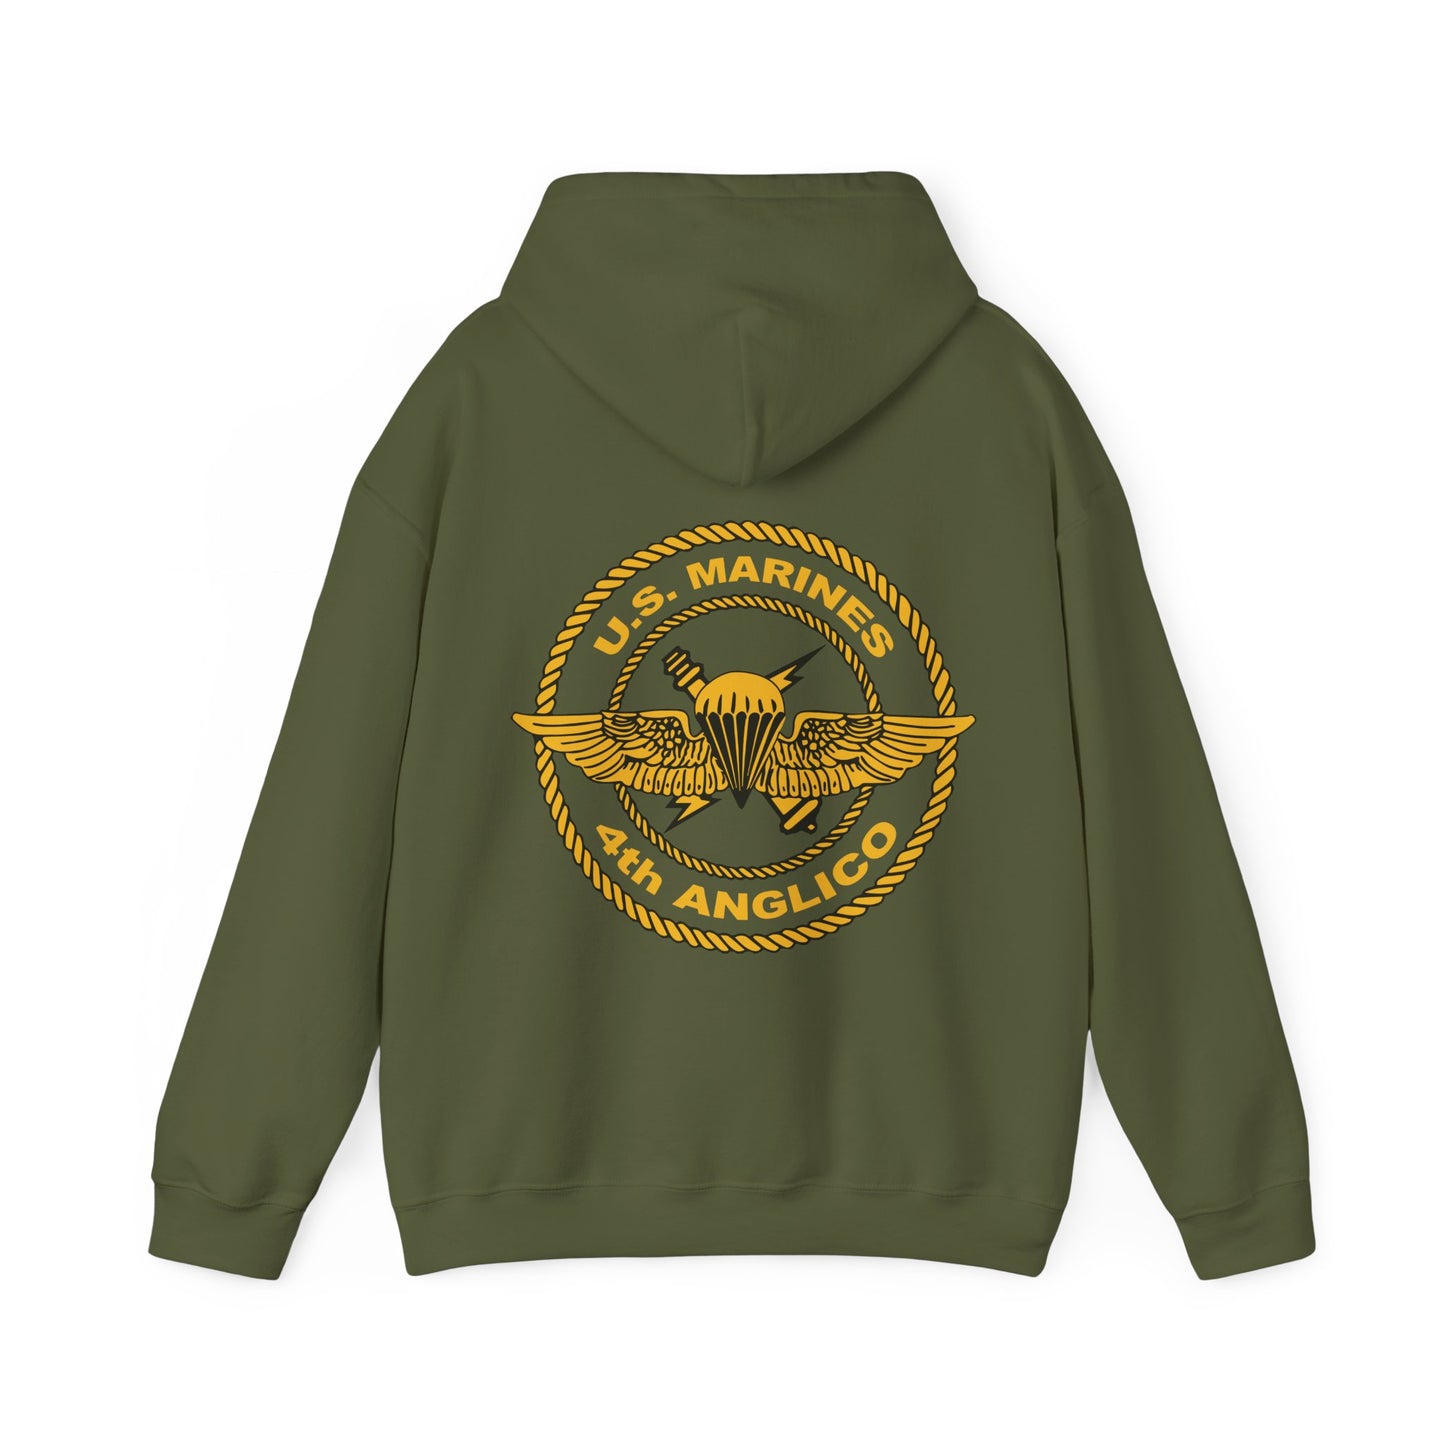 4th ANGLICO Hoodie